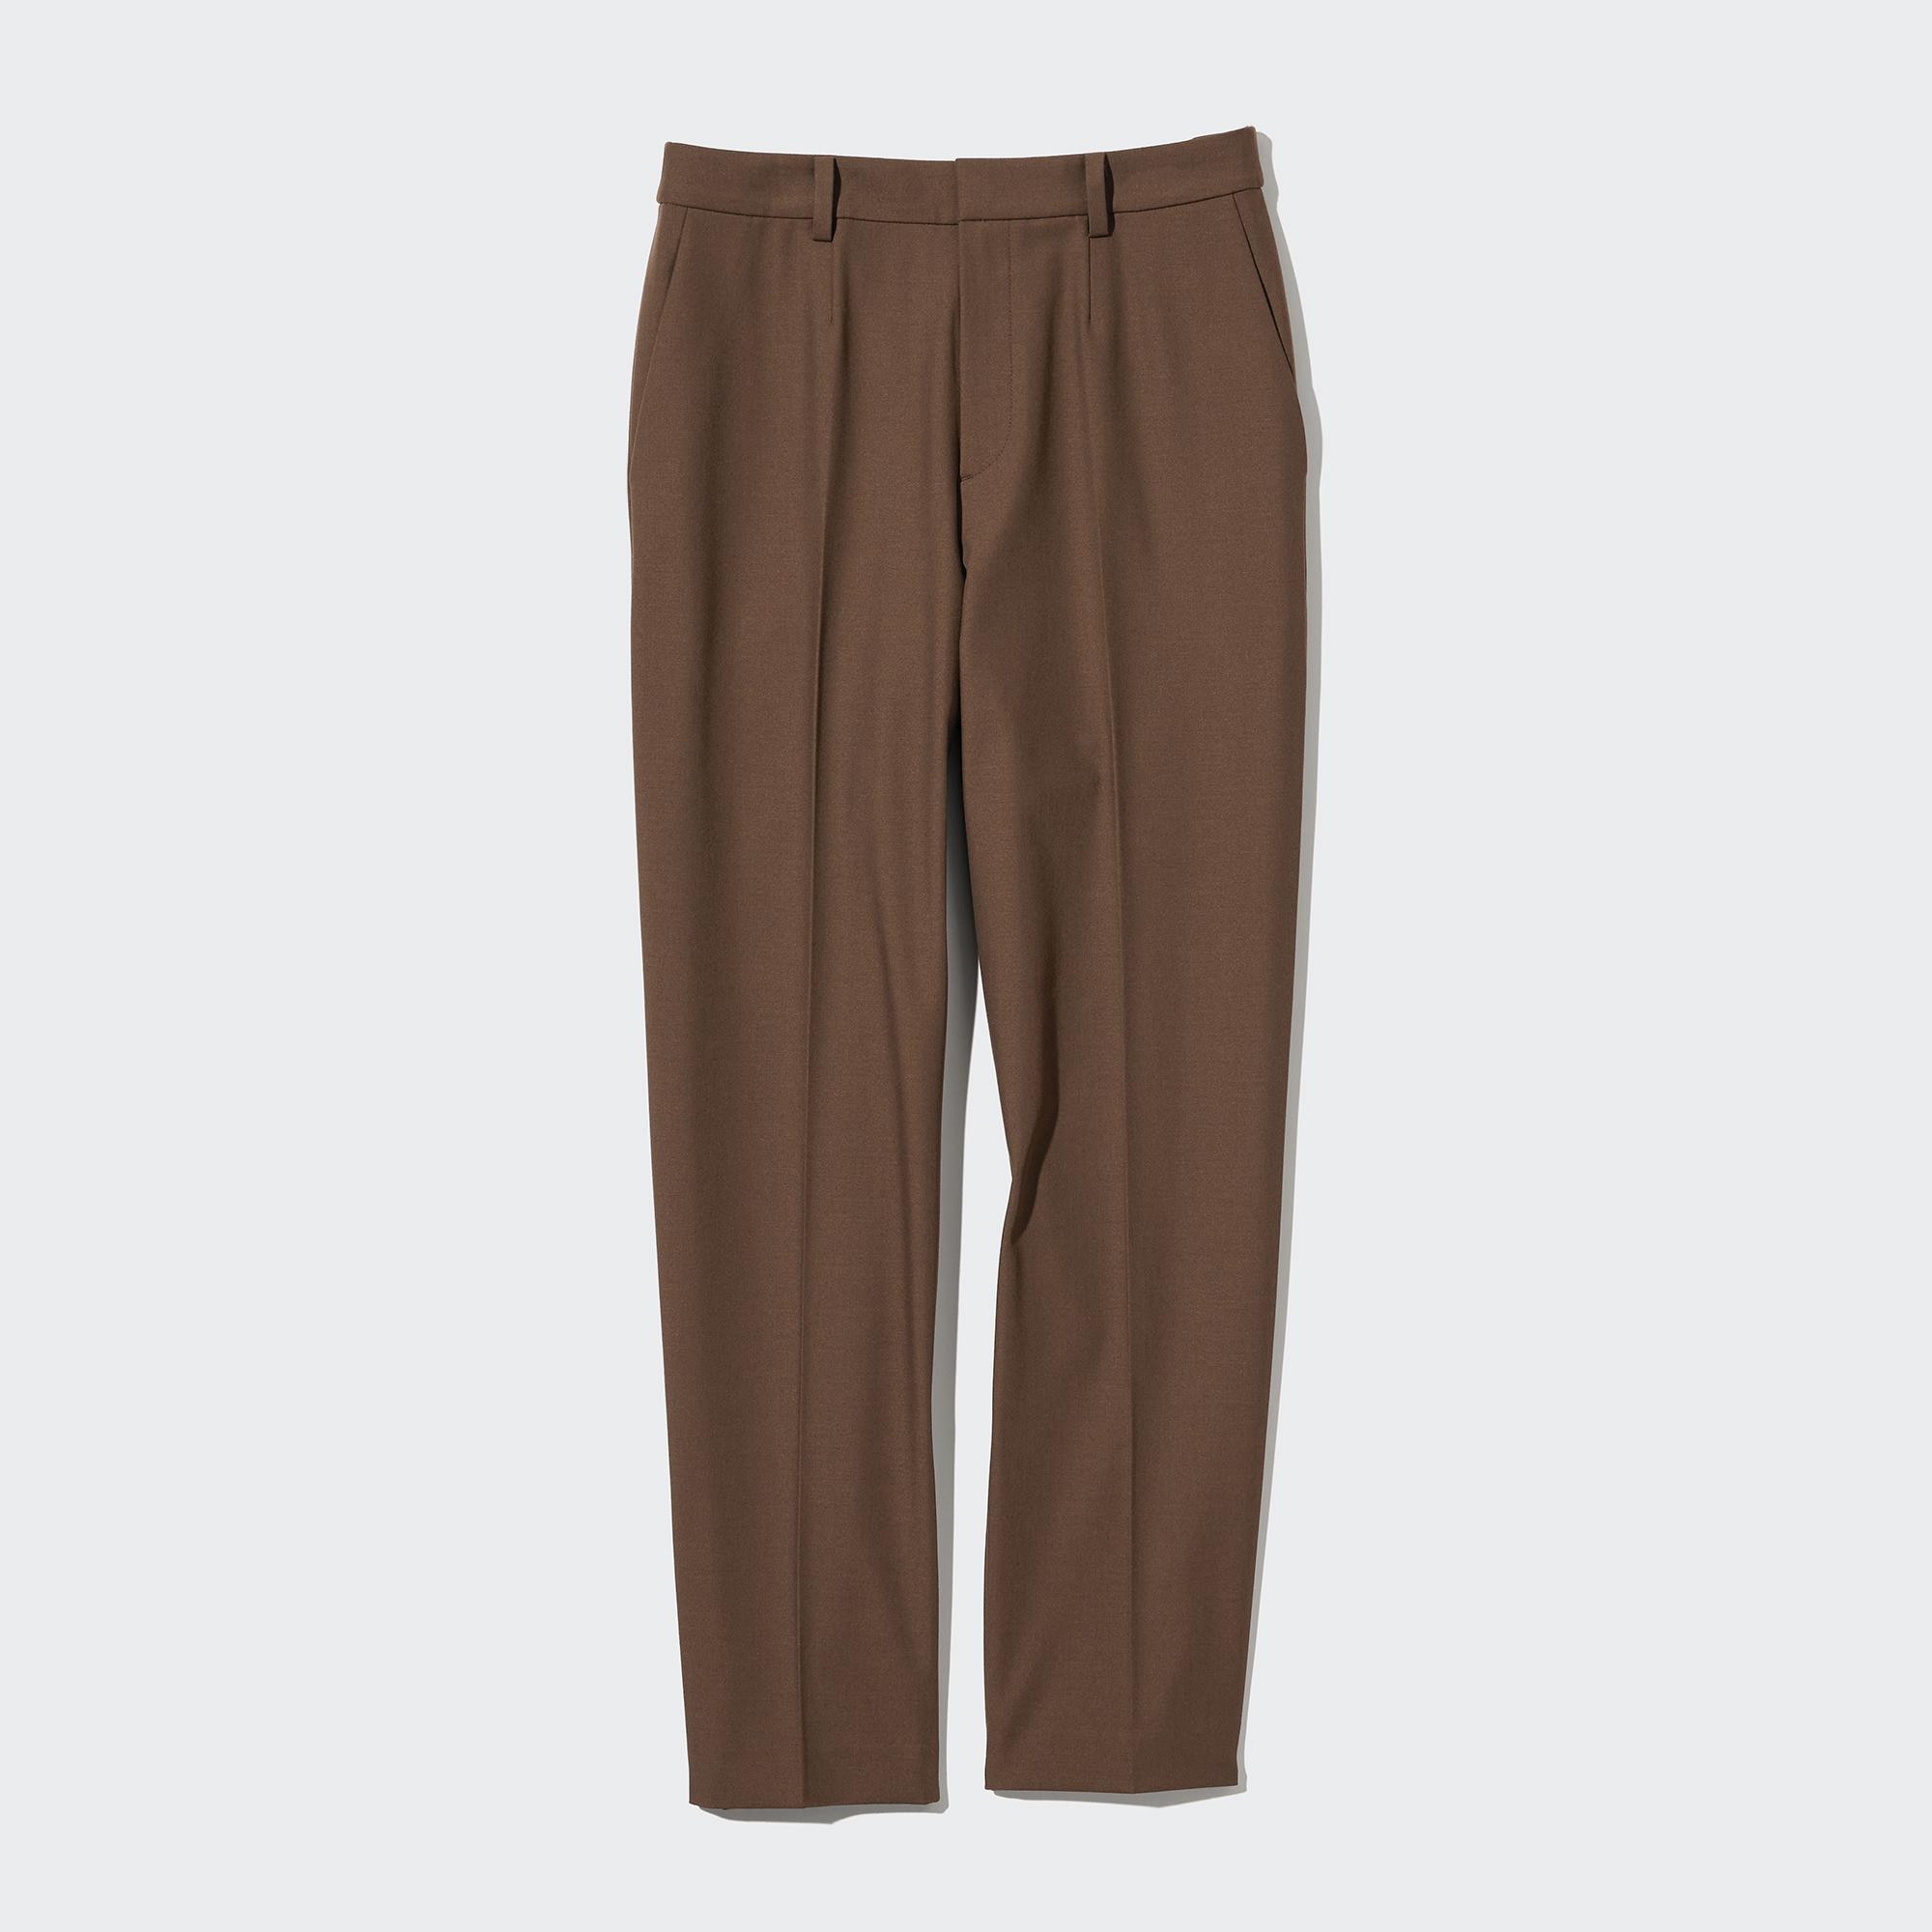 UNIQLO Smart Ankle Pants (2-Way Stretch, Tall)